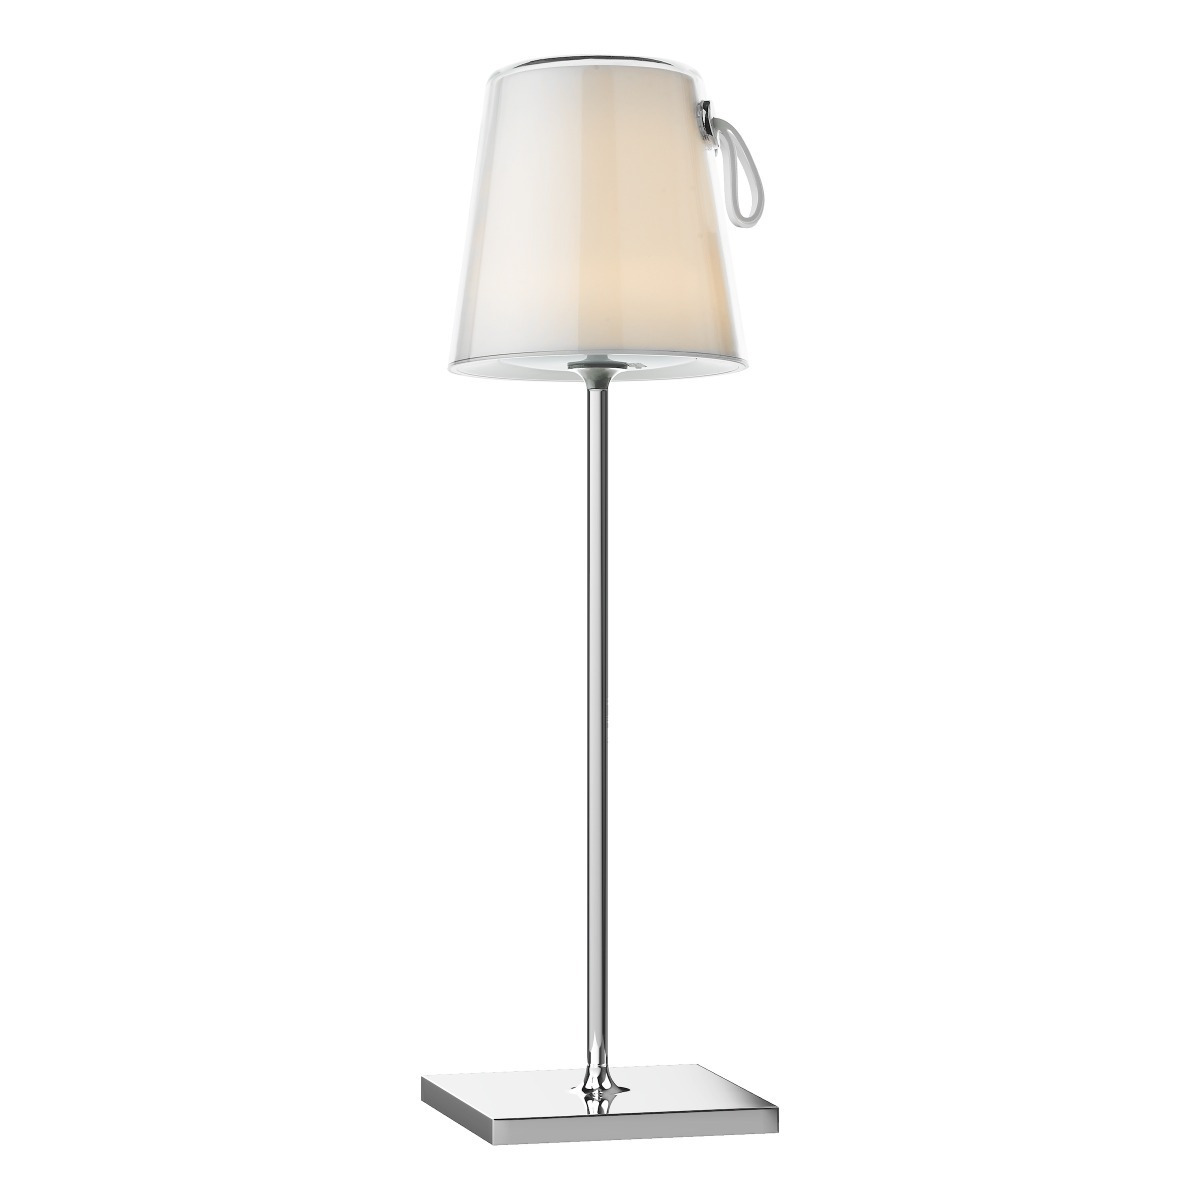 Dar Lighting Egor Colour Changing LED Table Lamp In Polished Chrome Finish